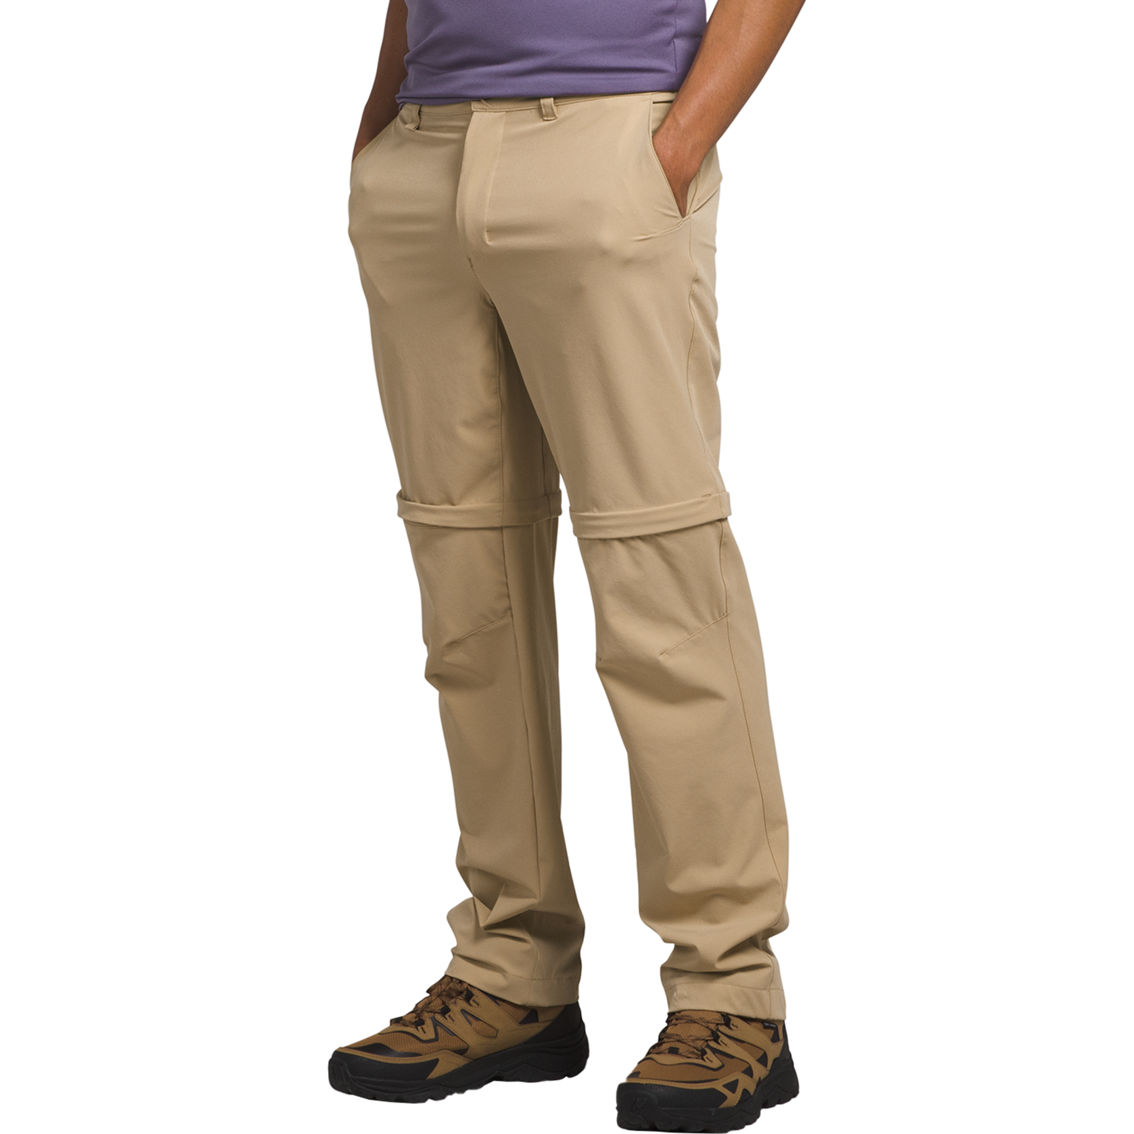 The North Face Paramount Convertible Pants - Image 3 of 4